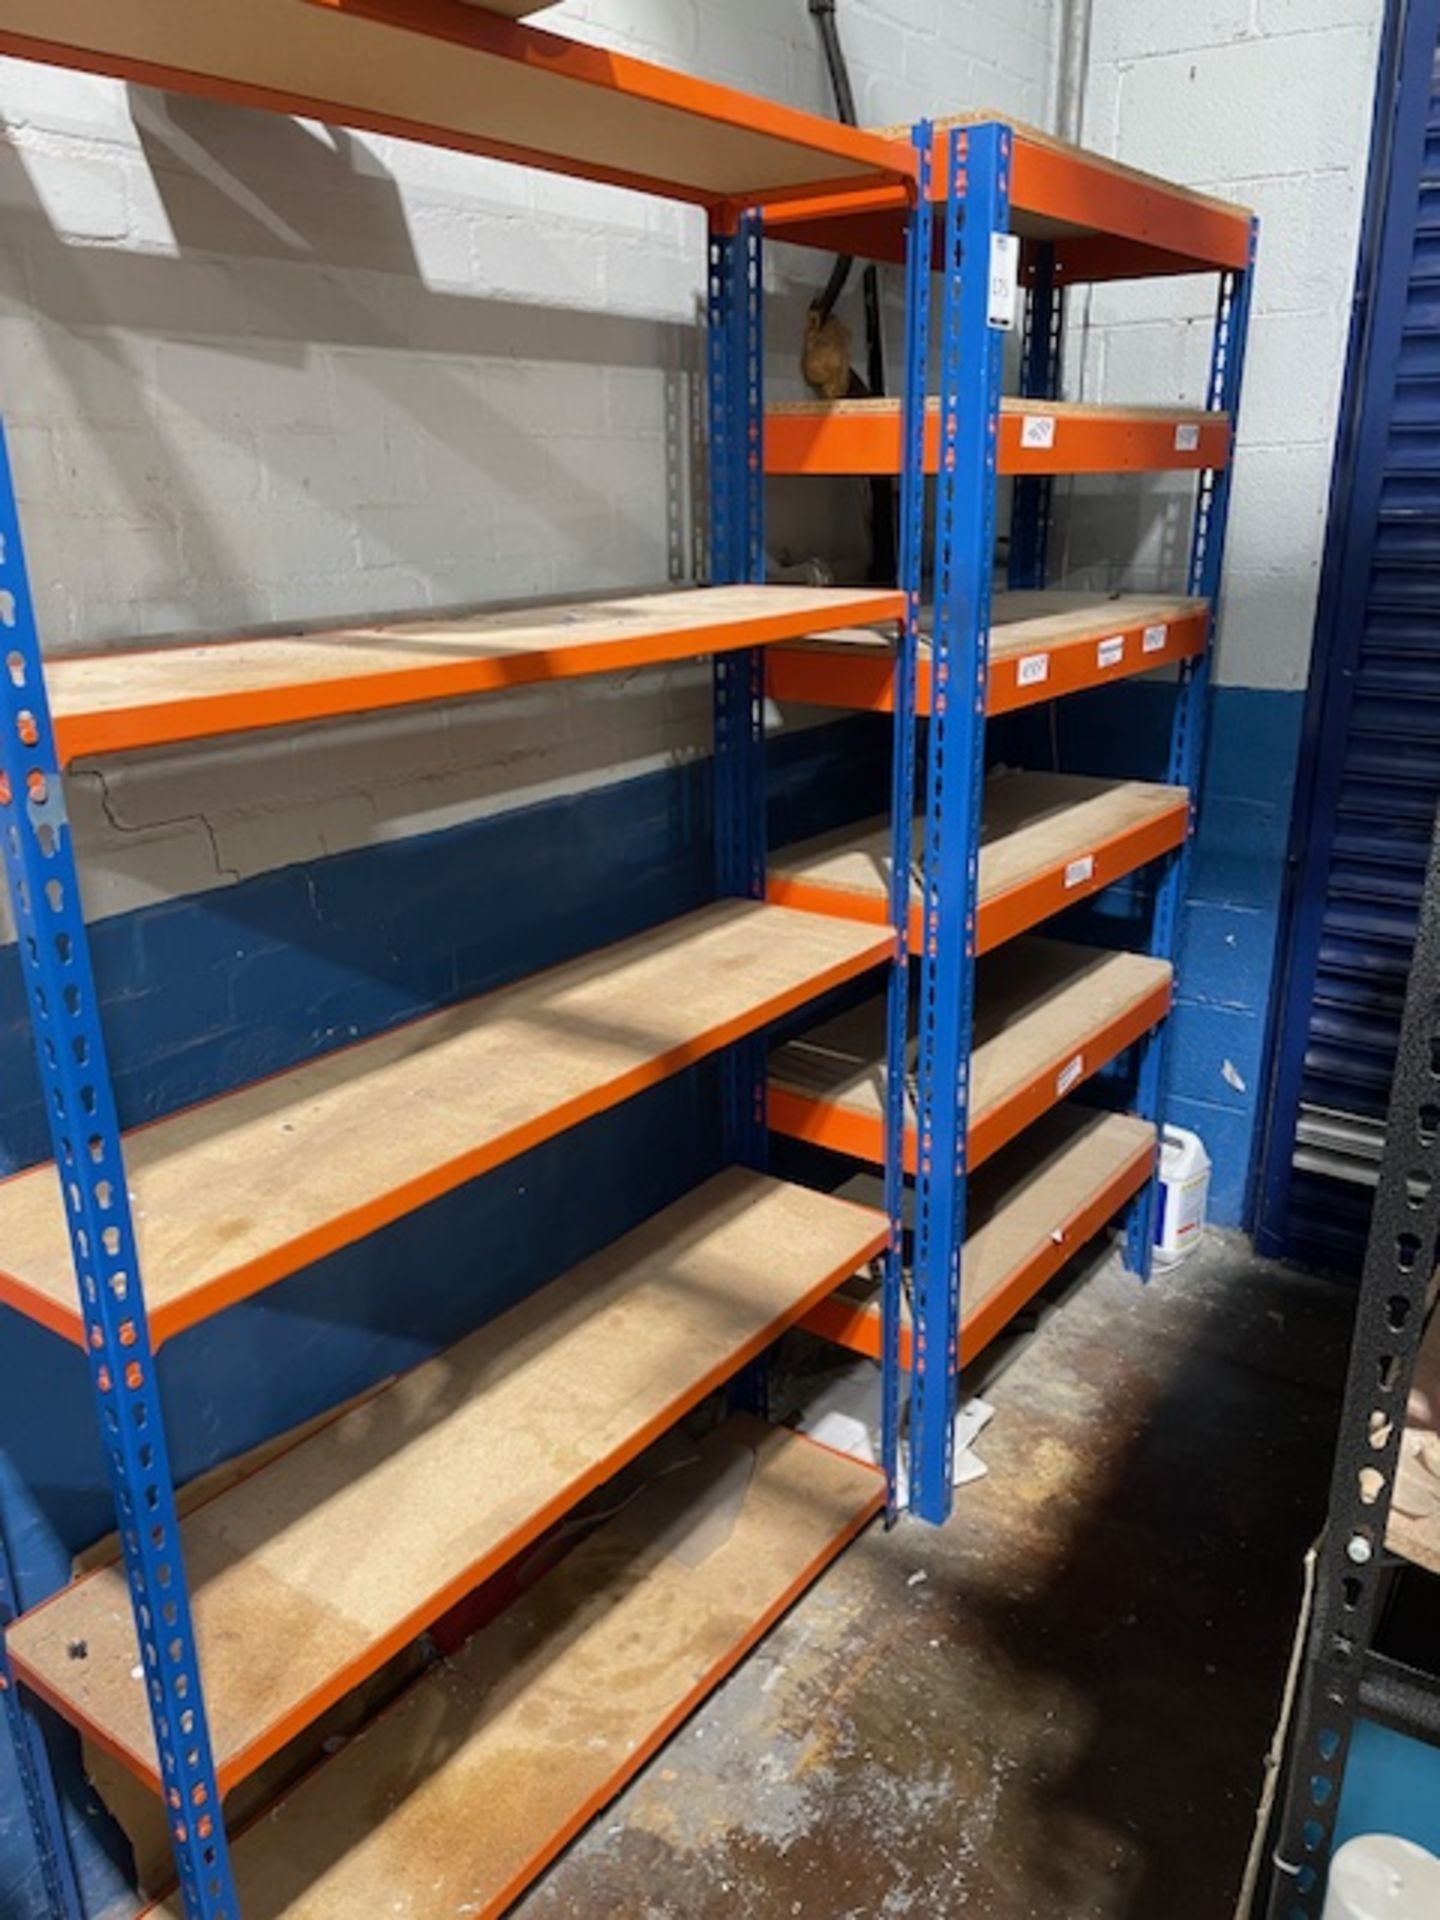 2 Orange/Blue Racks (Excluding Contents) (Location: Earls Barton. Please Refer to General Notes)